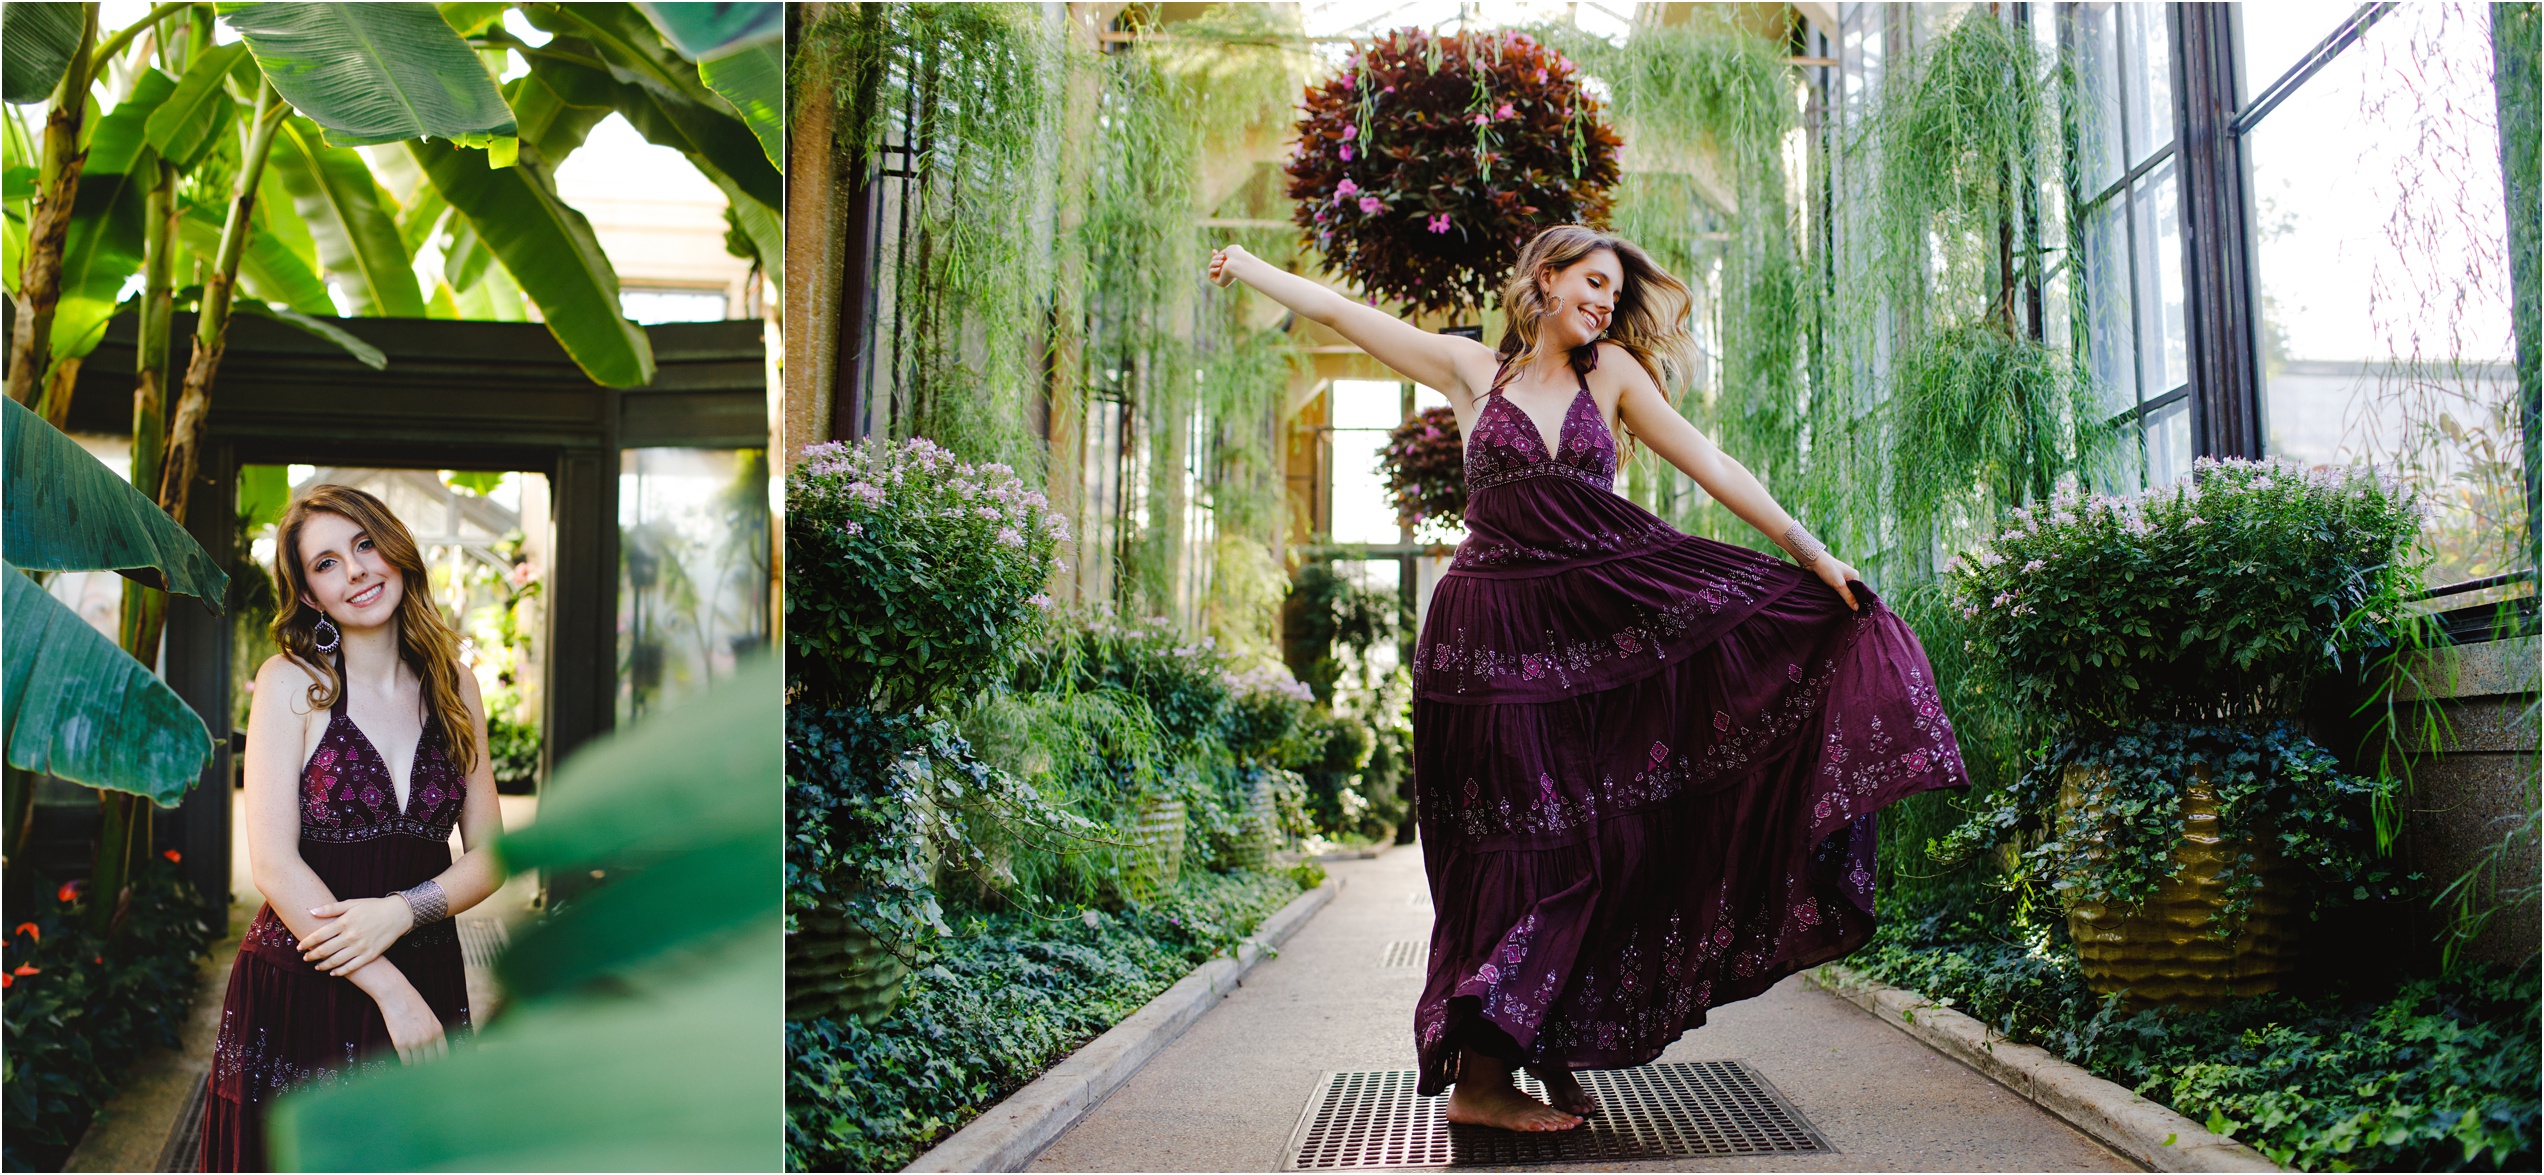 Clare looking through greenery and dancing in her deep purple beaded maxi dress in the greenhouse at Longwood gardens.